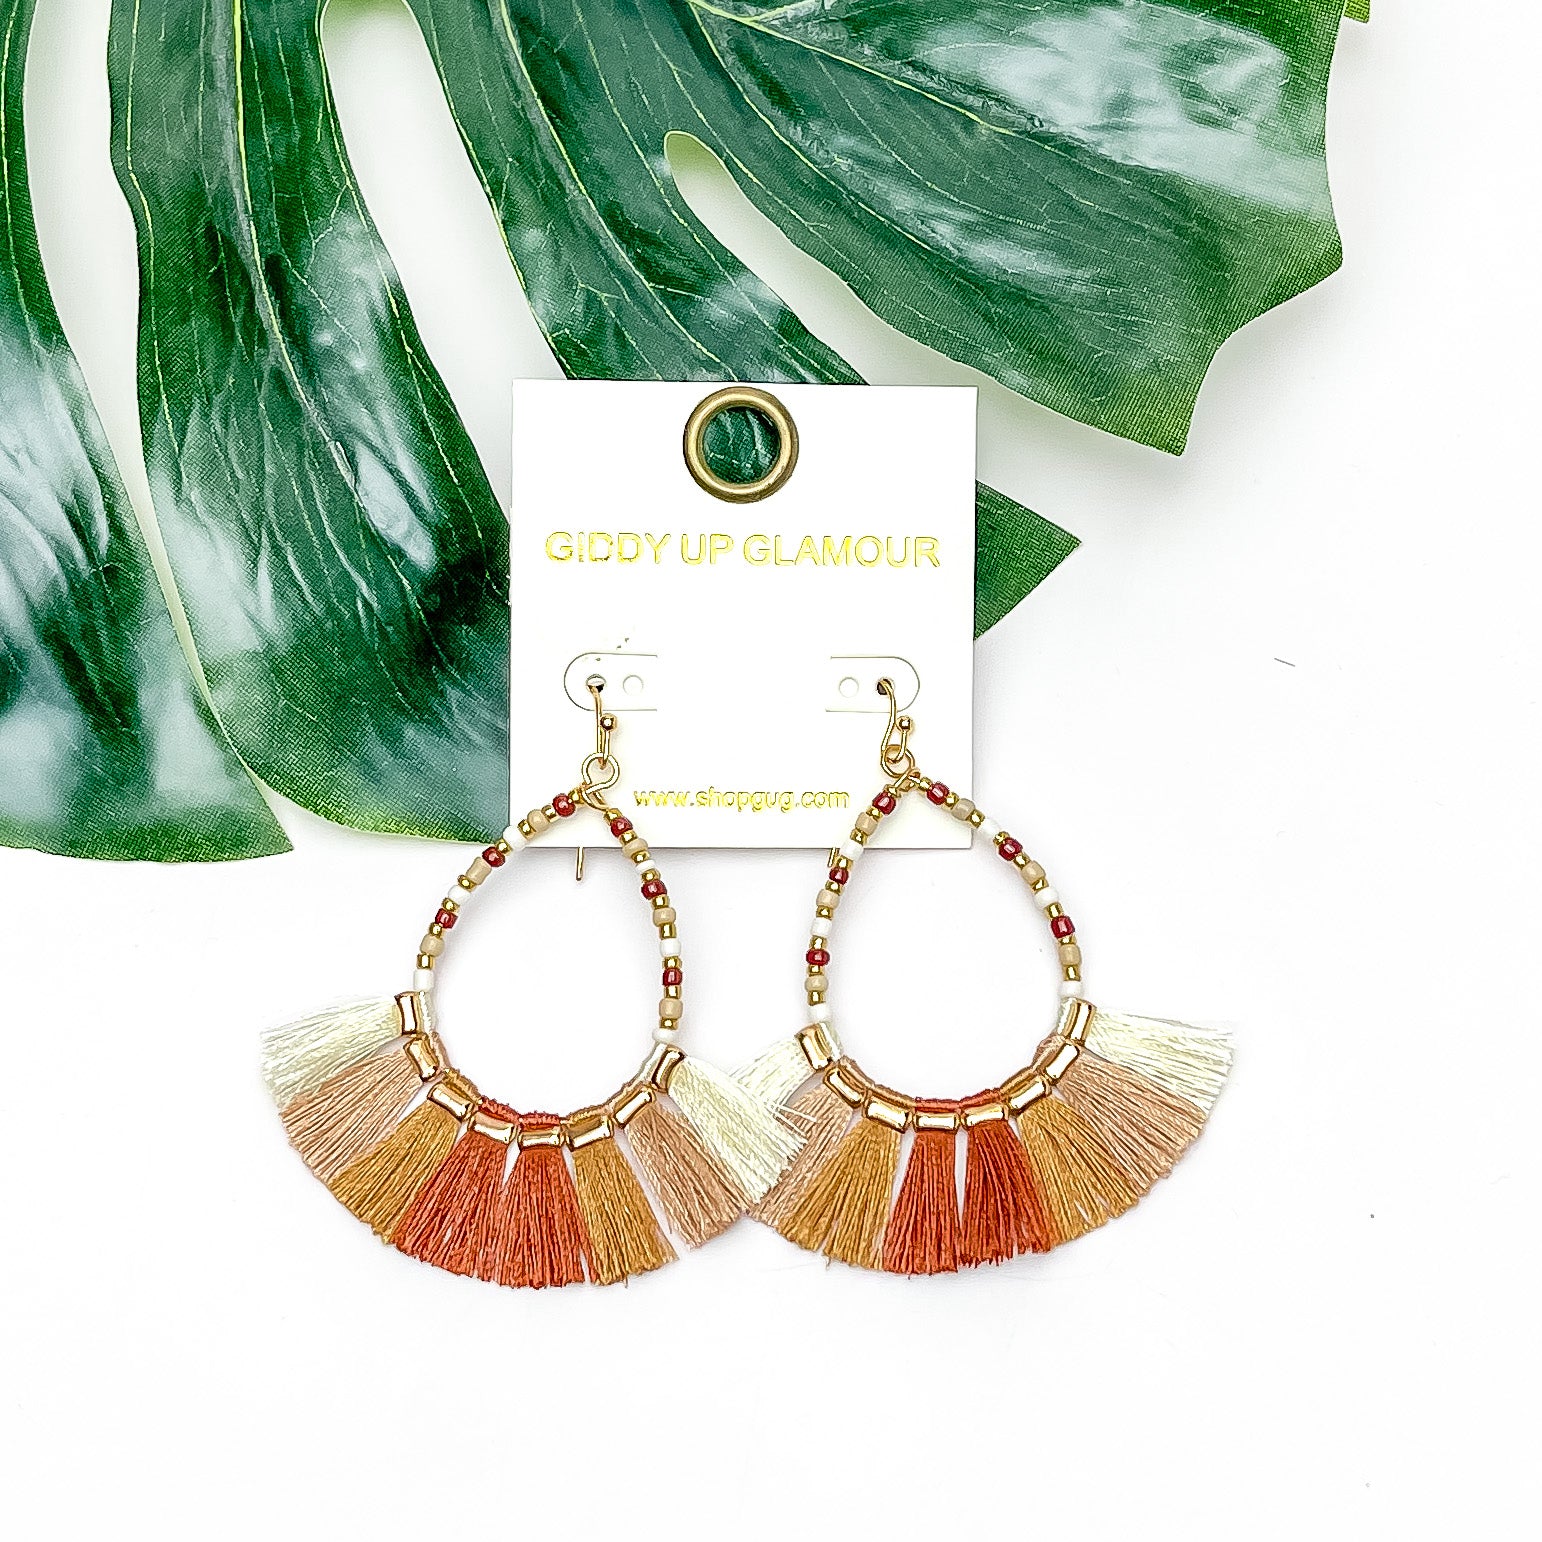 Beaded Open Teardrop Earrings With Fringe Bottom in Neutral Tones. Pictured on a white background with a leaf behind the earrings.